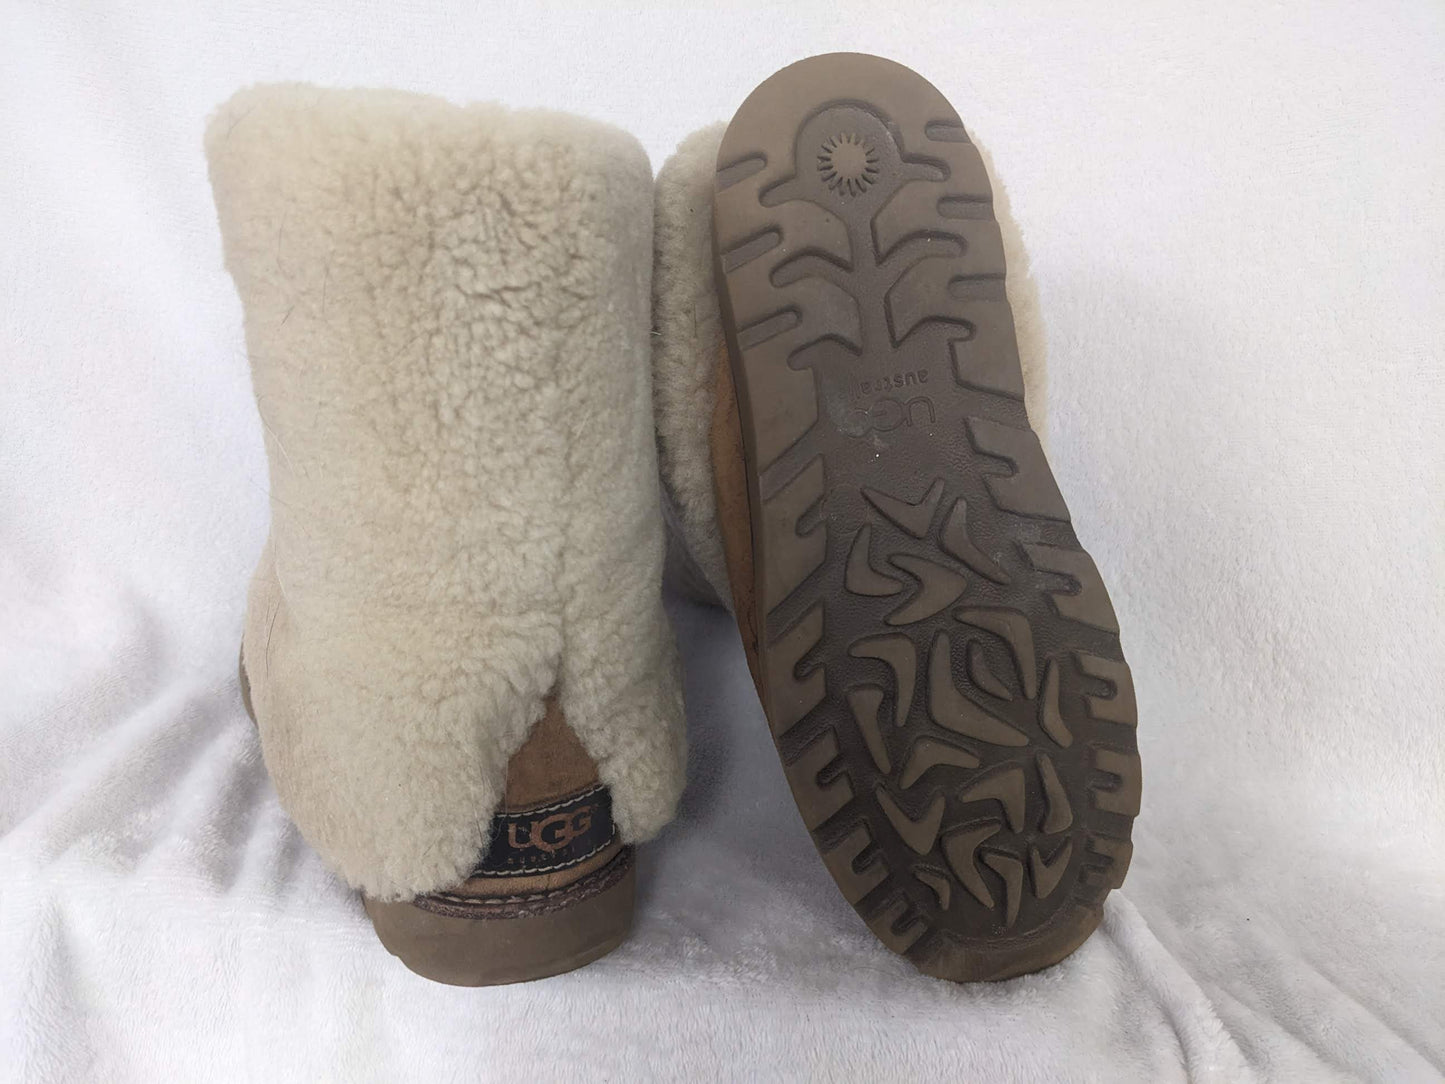 Ugg Fleece Lined Snow Boots Size 7 Color Brown Condition Used